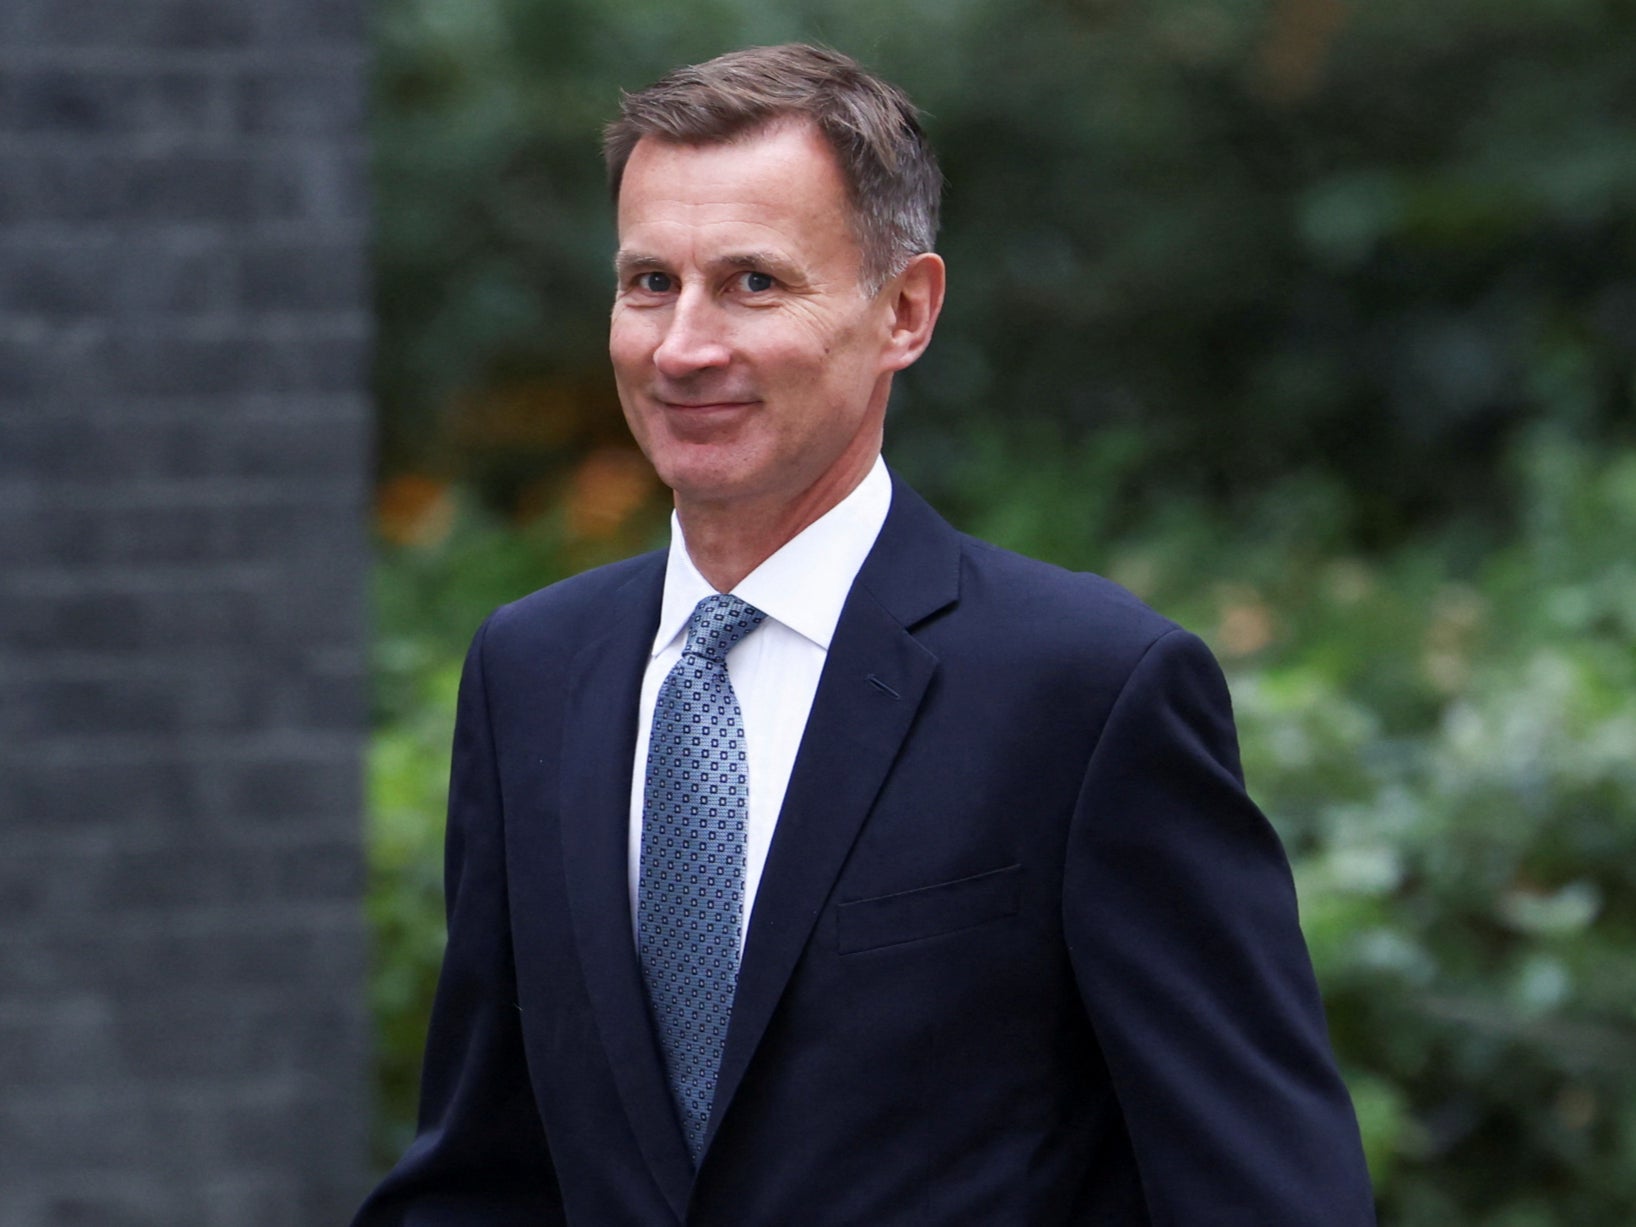 Jeremy Hunt revealed he suffered a “minor” battle with the disease